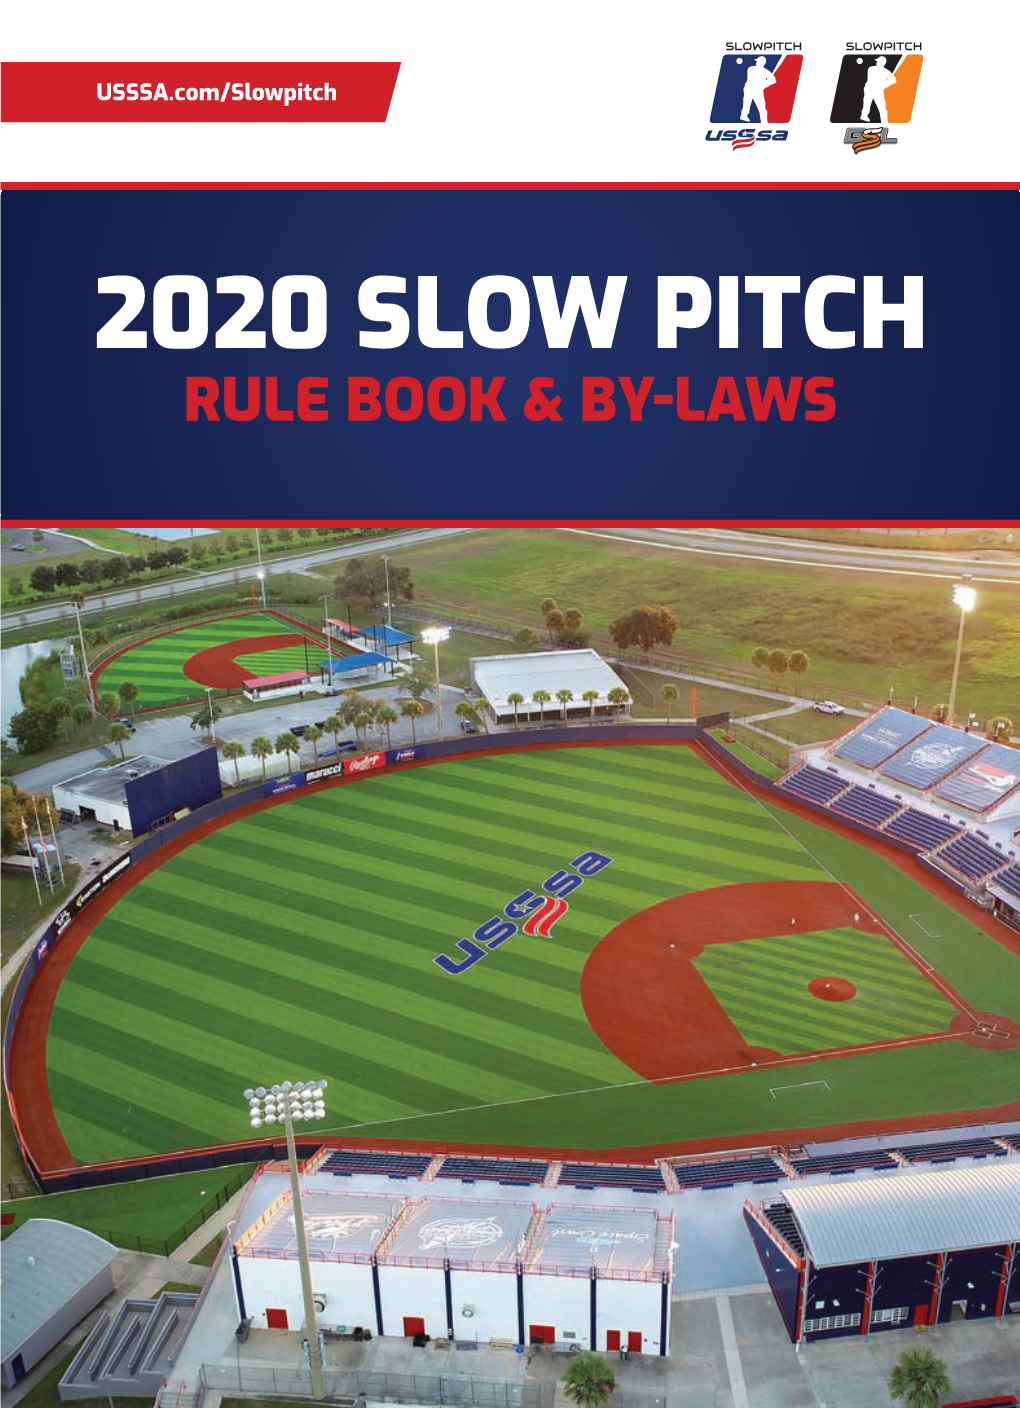 2020 Slow Pitch Rule Book & By-Laws